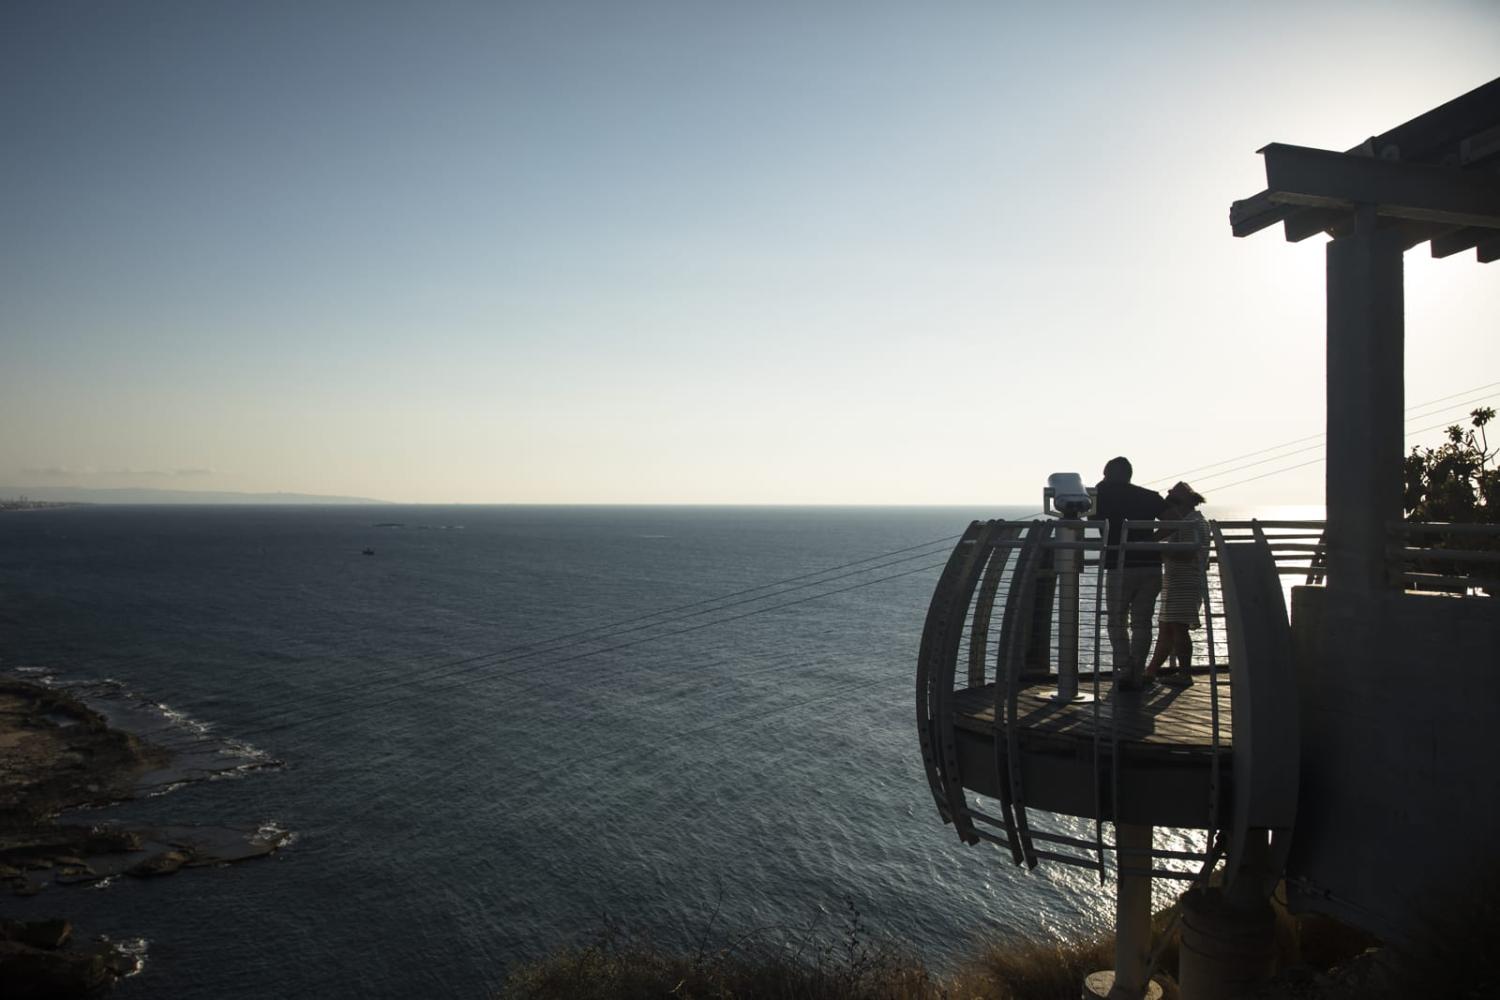 Looking out to the Mediterrenean sea at the Rosh Hanikra tourist site on the Israeli side of the border with Lebanon (Amir Levy/Getty Images)